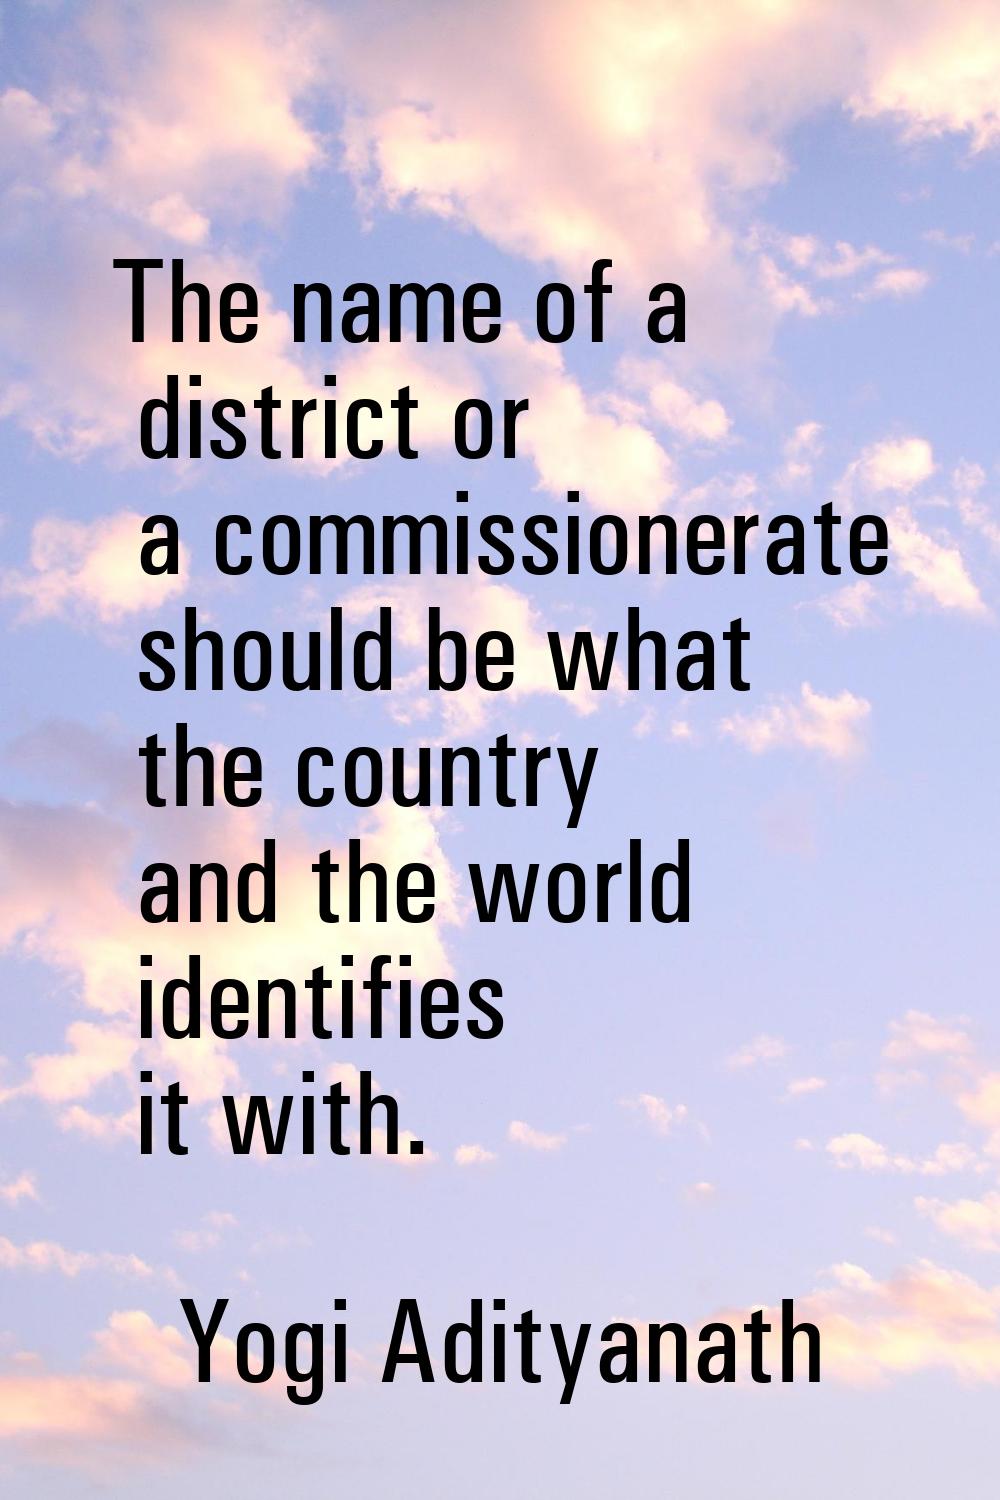 The name of a district or a commissionerate should be what the country and the world identifies it 